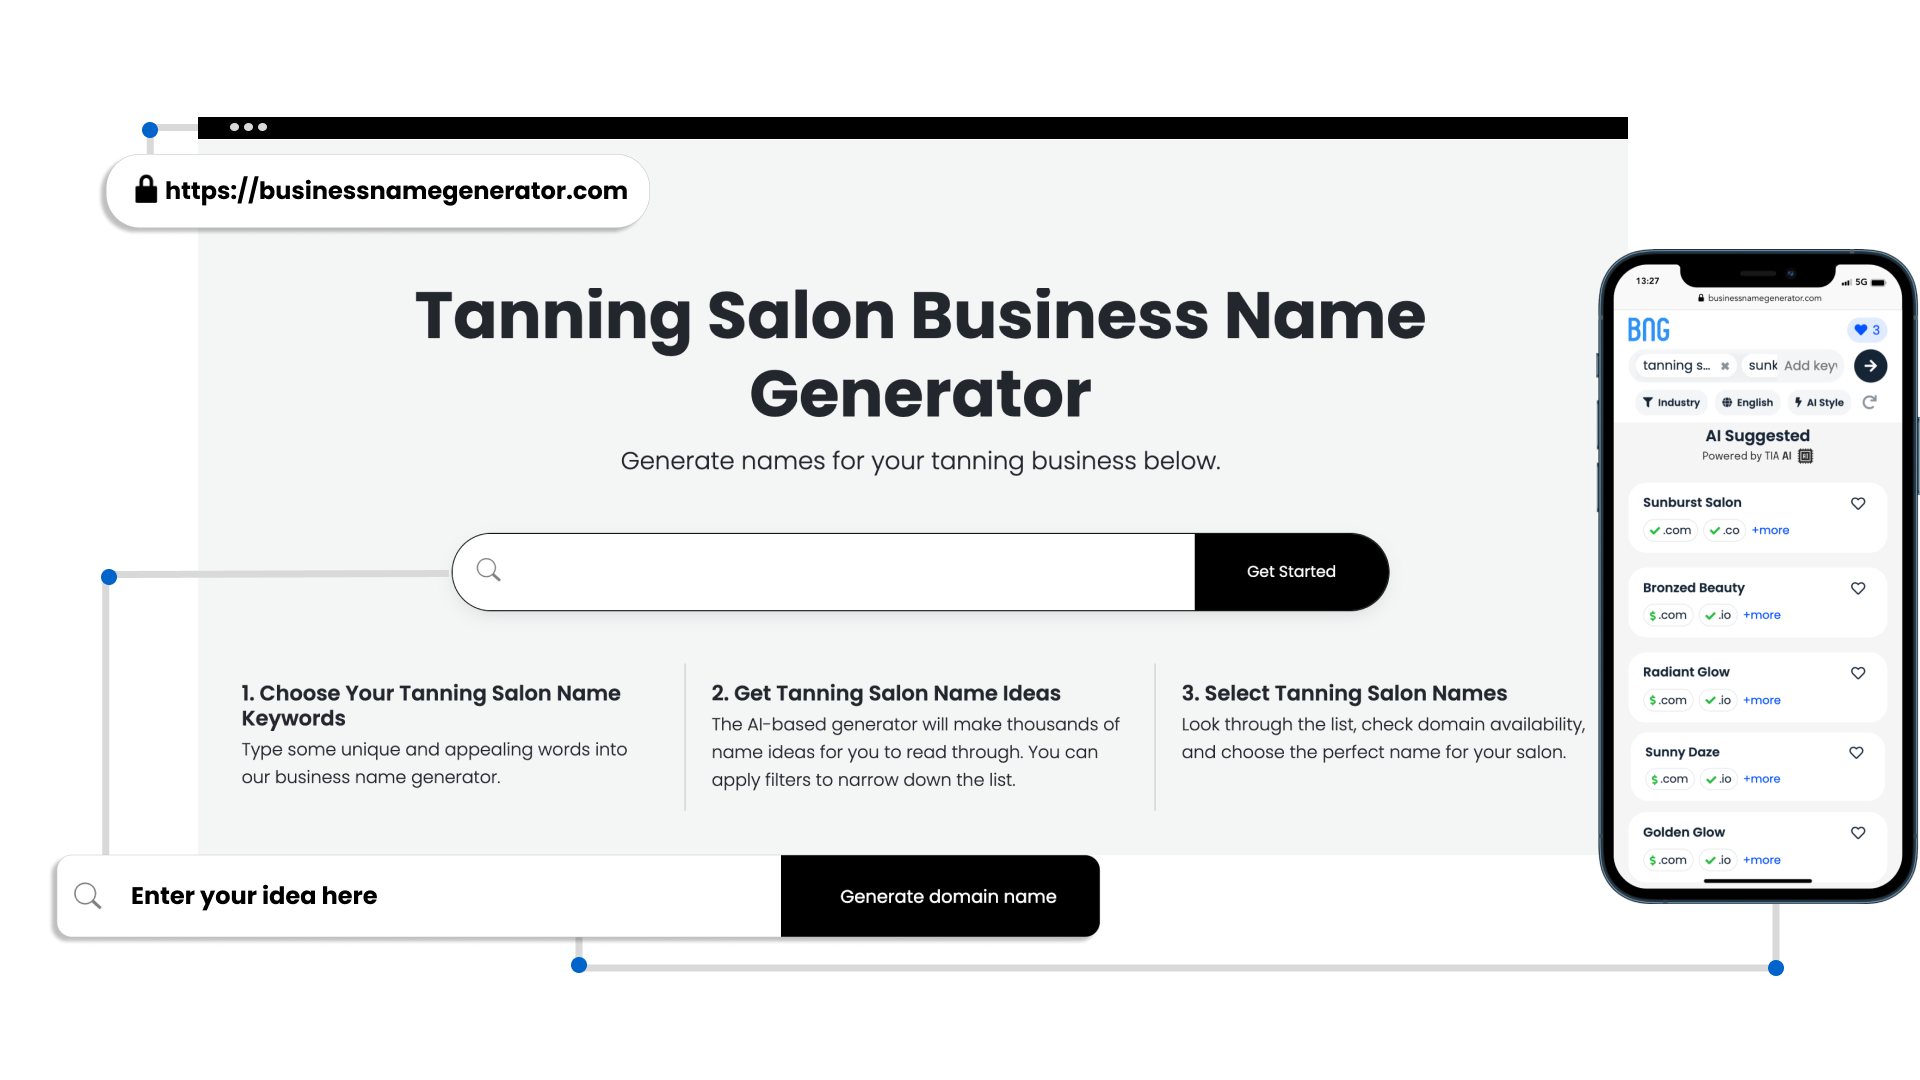 Benefits of Our Tanning Business Name Generator